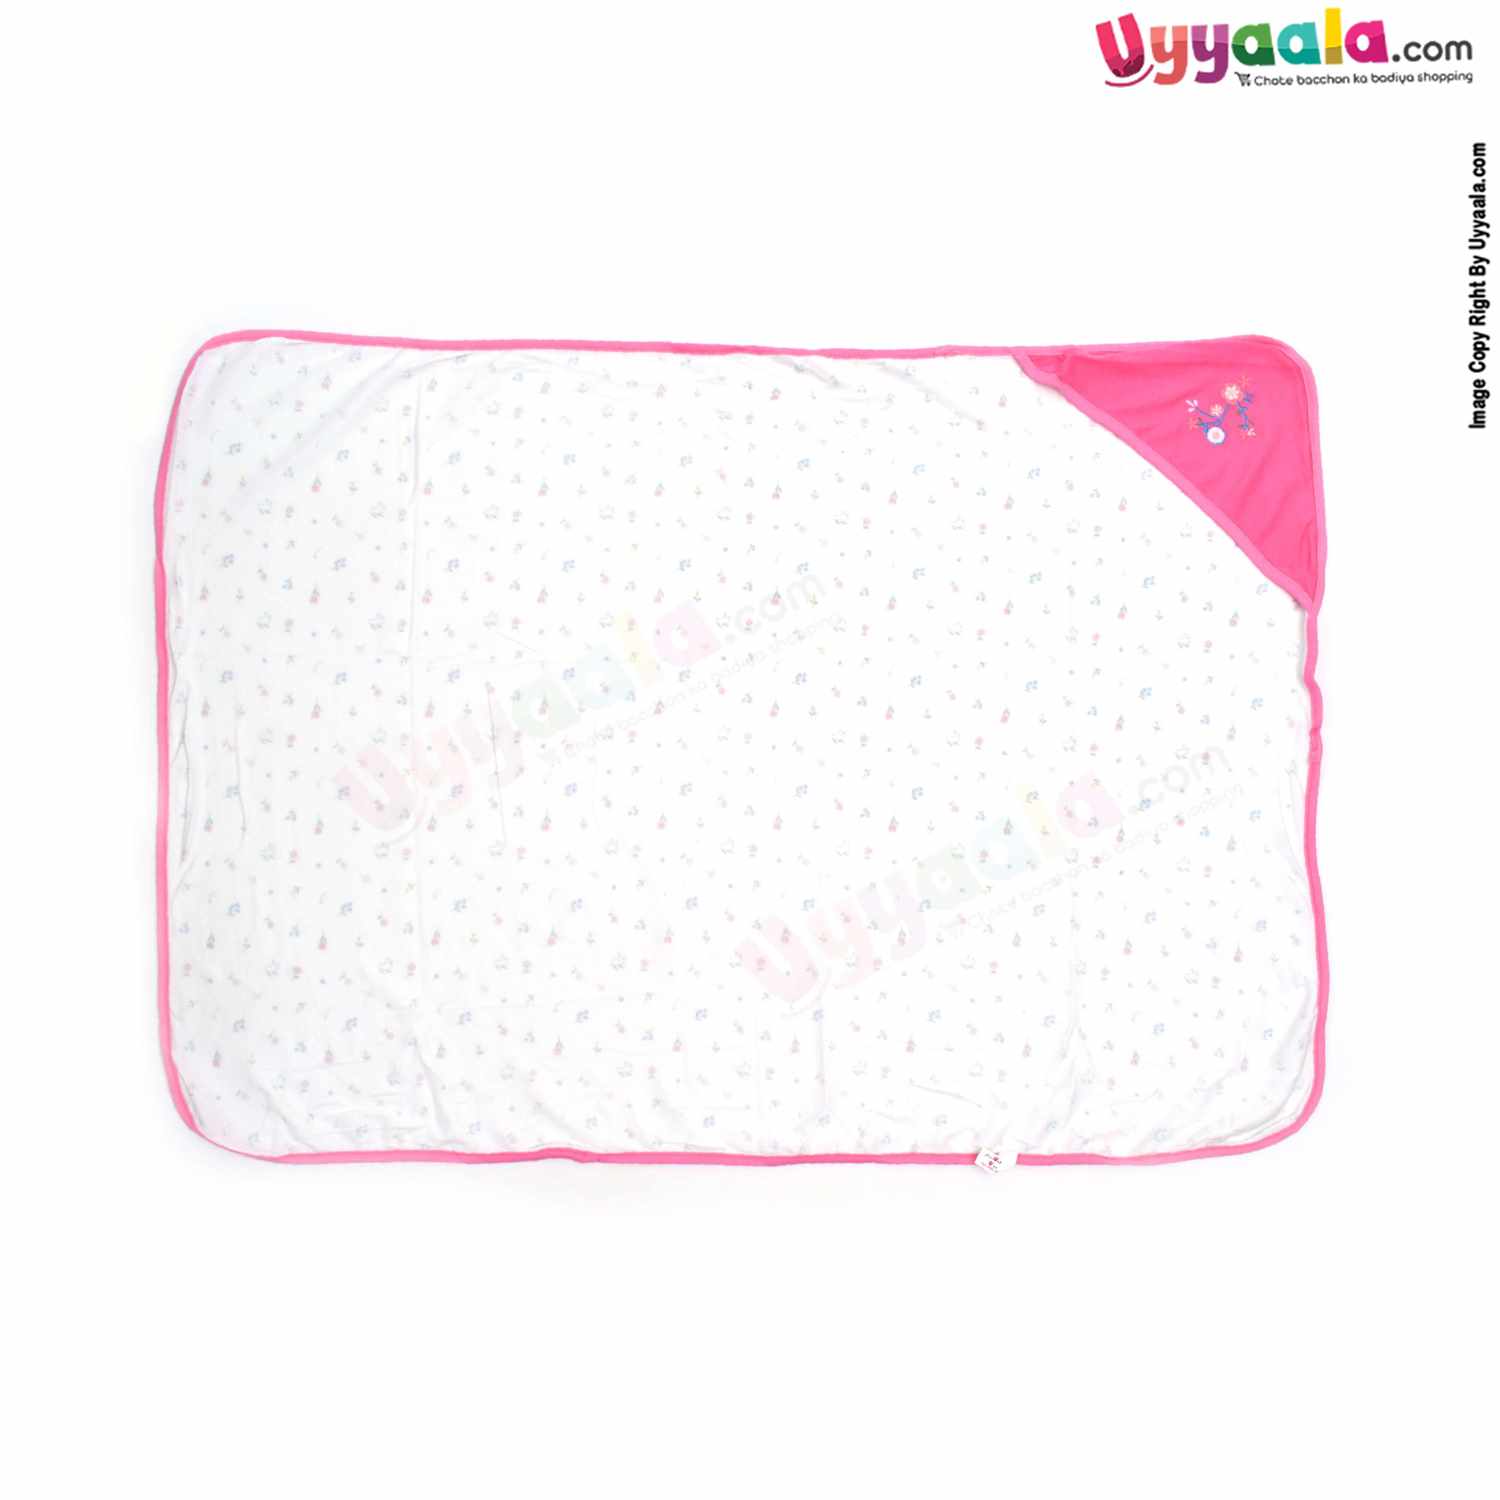 Cotton Hosiery Hooded Towel for Babies with Floral Print 1pc 0+m Age, Size (75*72Cm)- Pink & White